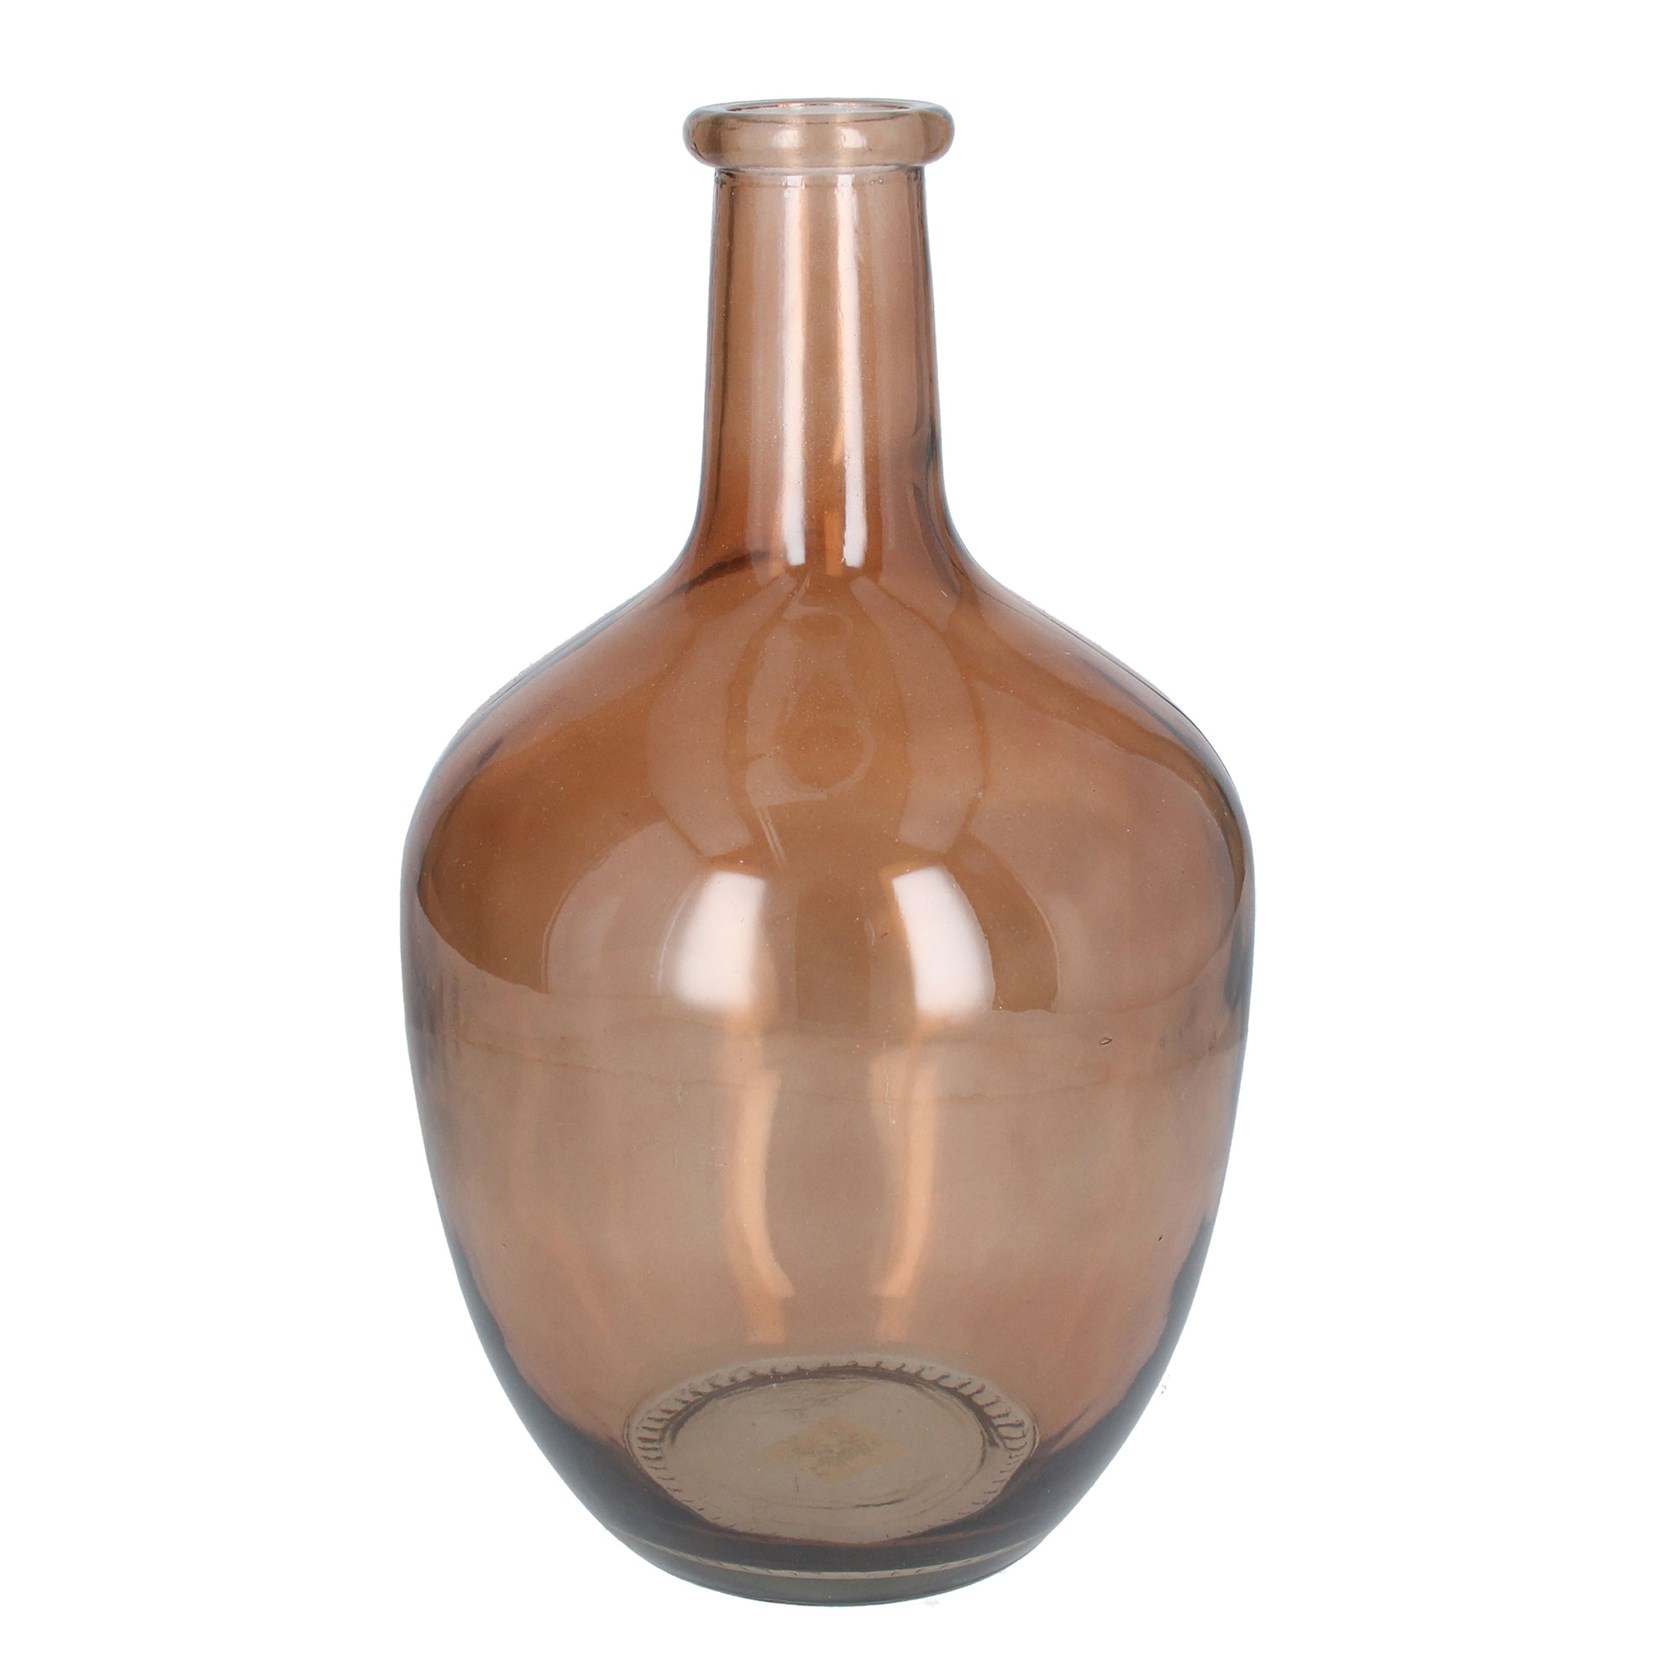 A large dark amber coloured rum glass bottle shaped vase. The perfect addition to your home or the perfect gift for yourself or a loved one. By London designer Gisela Graham.